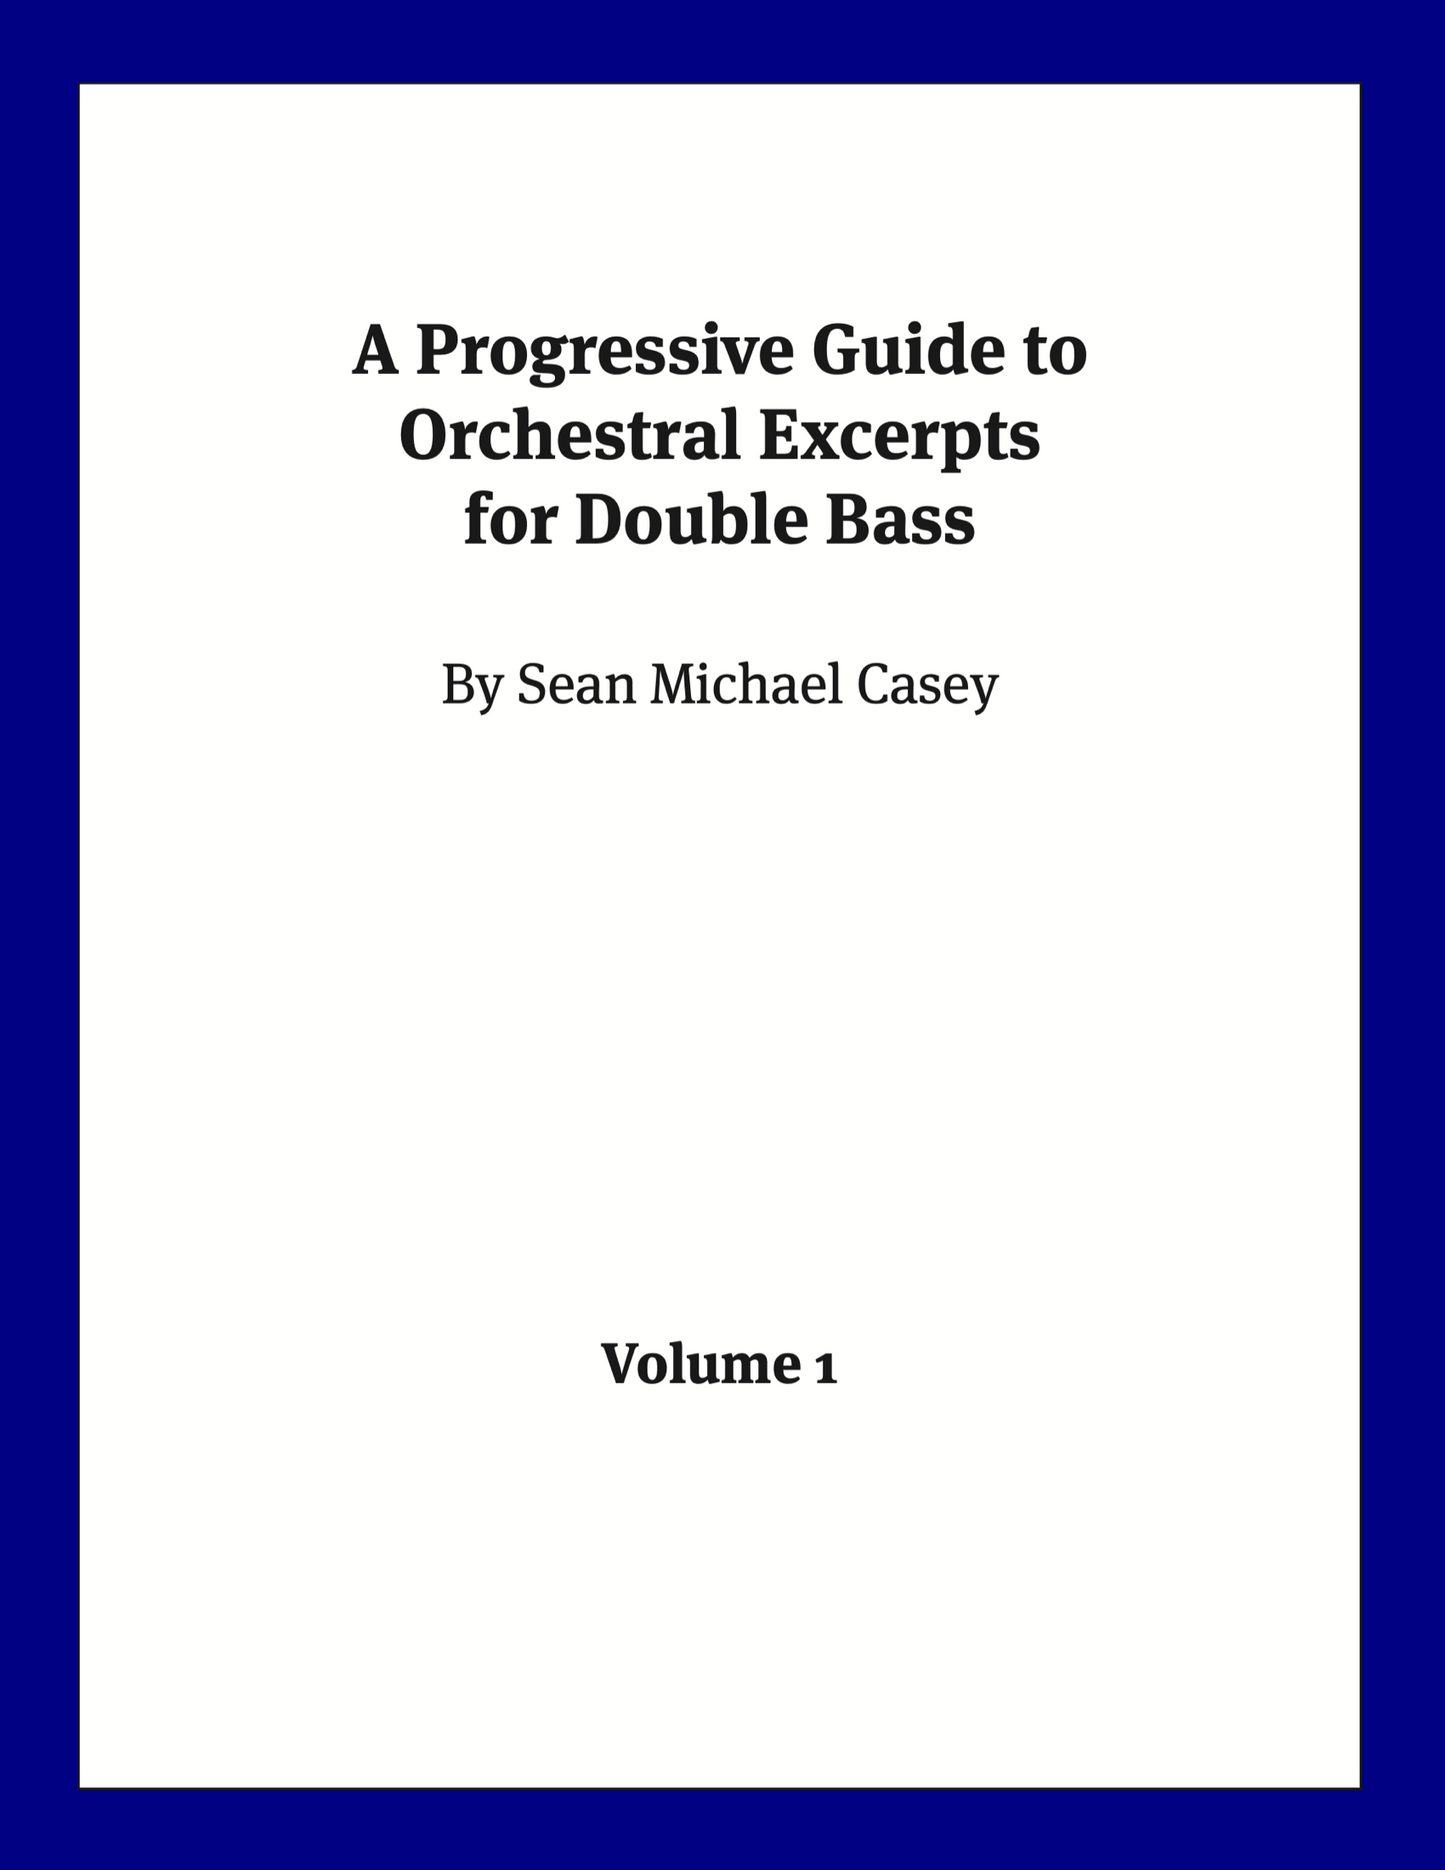 A Progressive Guide to Orchestral Excerpts for Double Bass, Volume 1 by Sean Casey